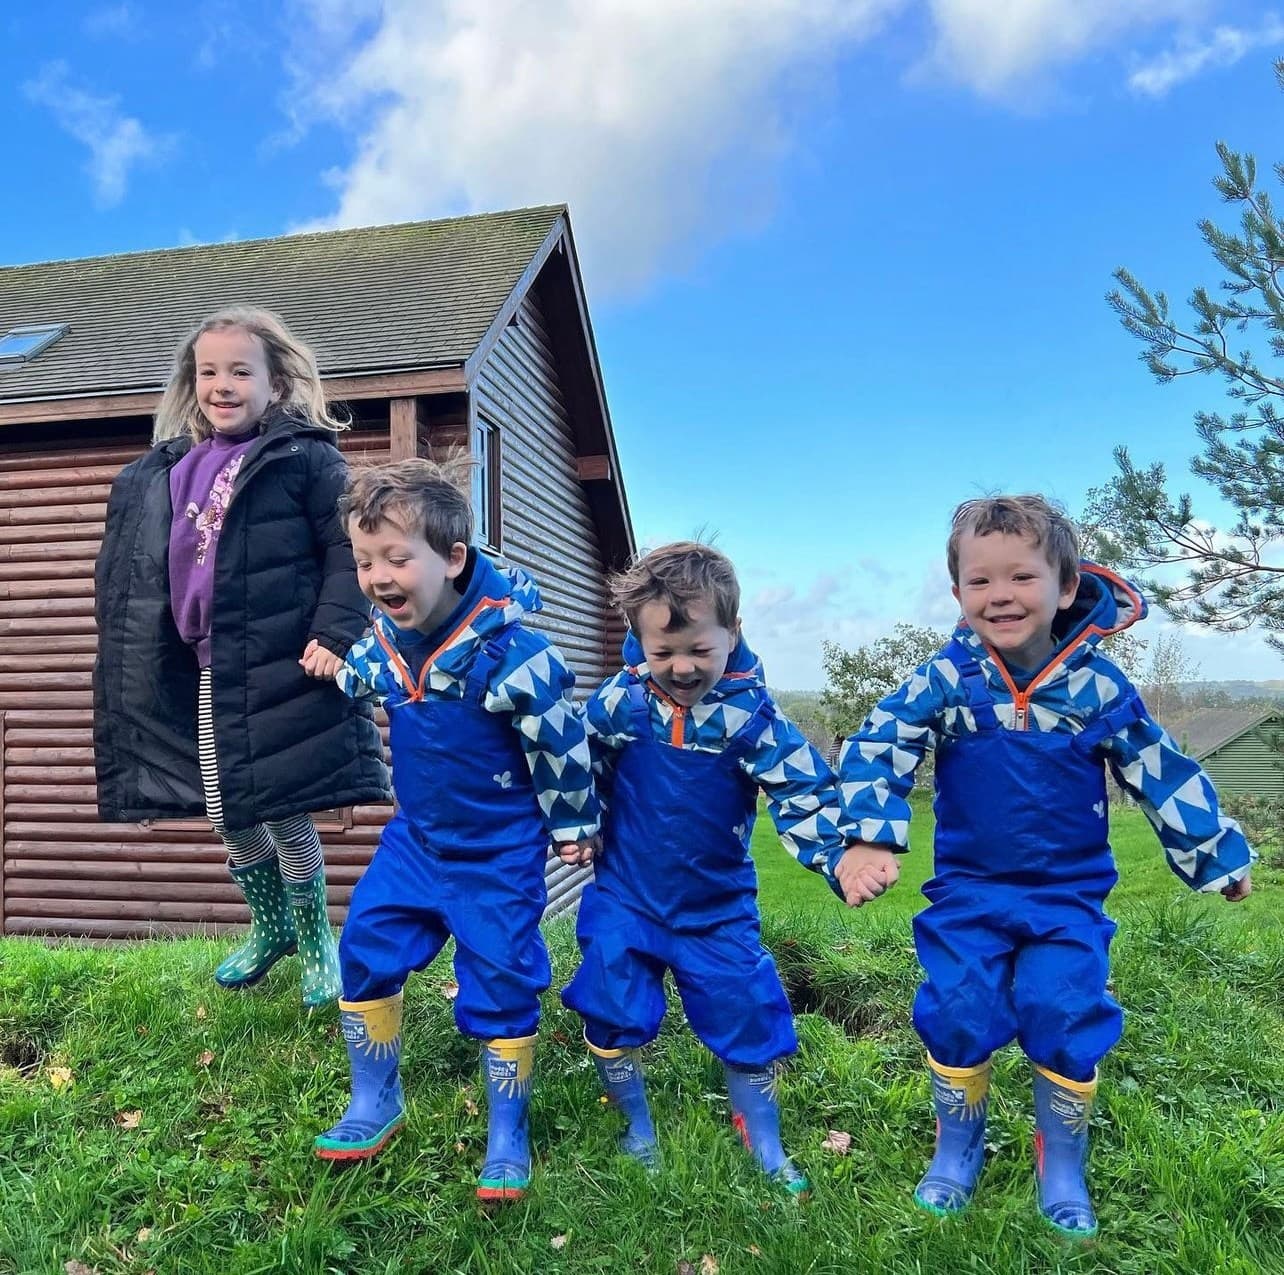 Matching outfits, matching excitement - it's arrival day!🤭🛺🏡

📸 Don't forget to share your memories with us. Use the hashtag #MyBluestoneBreak and tag us @bluestonewales for your chance to be featured. ✨

(📷: triplets_and_megan)